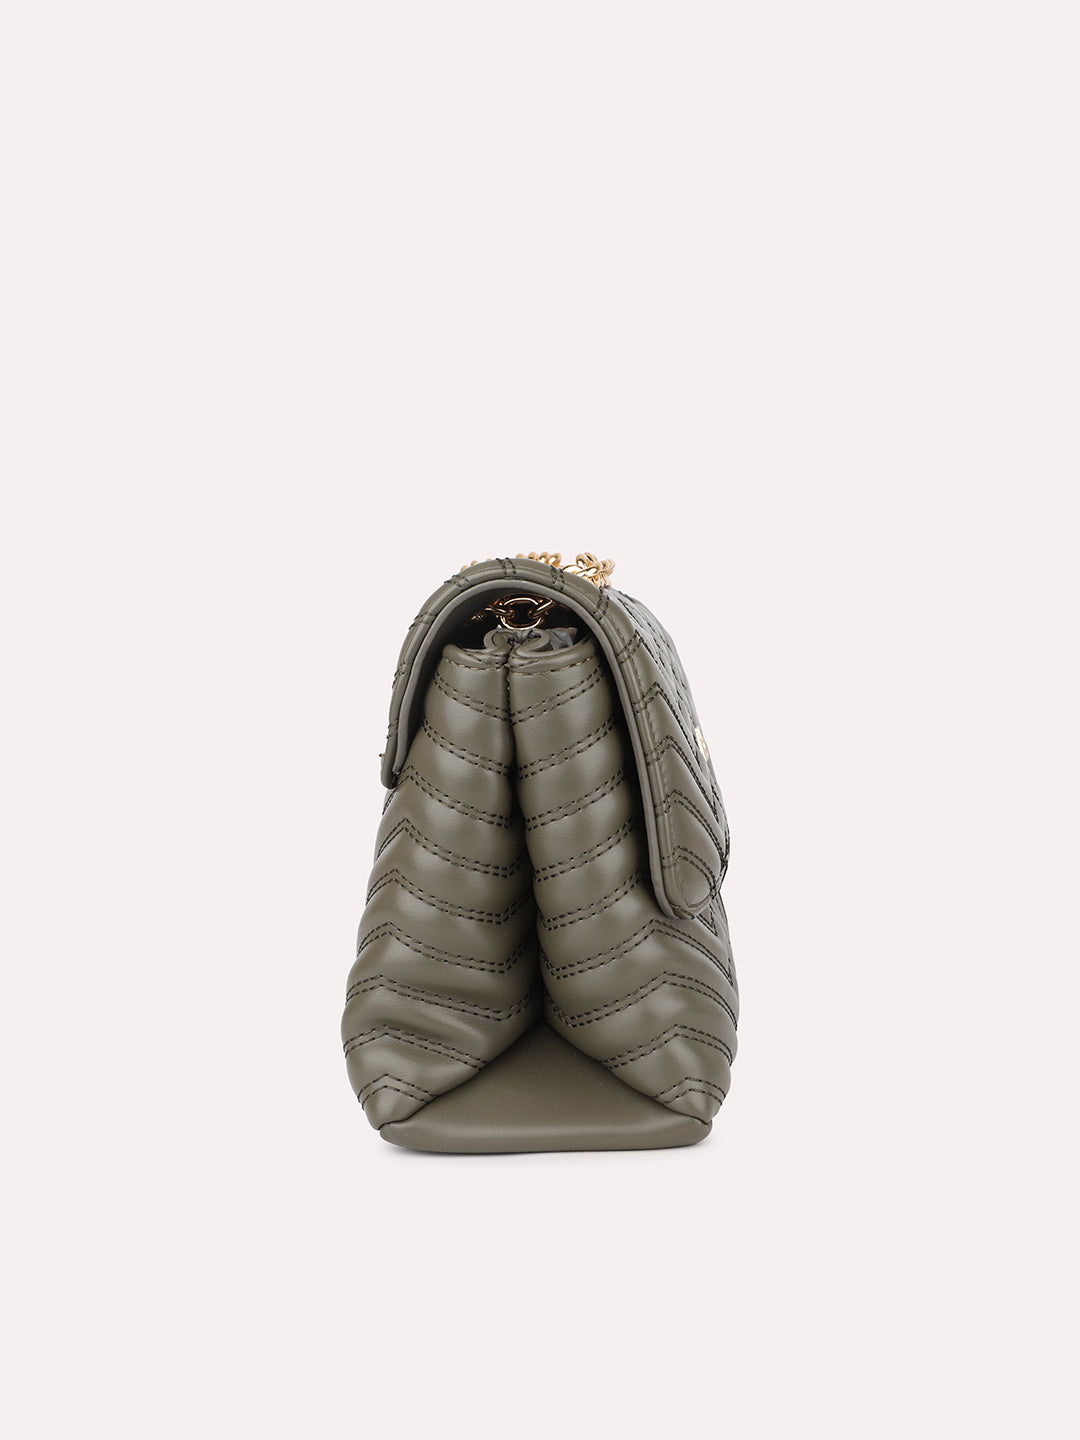 Textu Olive Structured Chain Sling Bag With Quilted Detailing